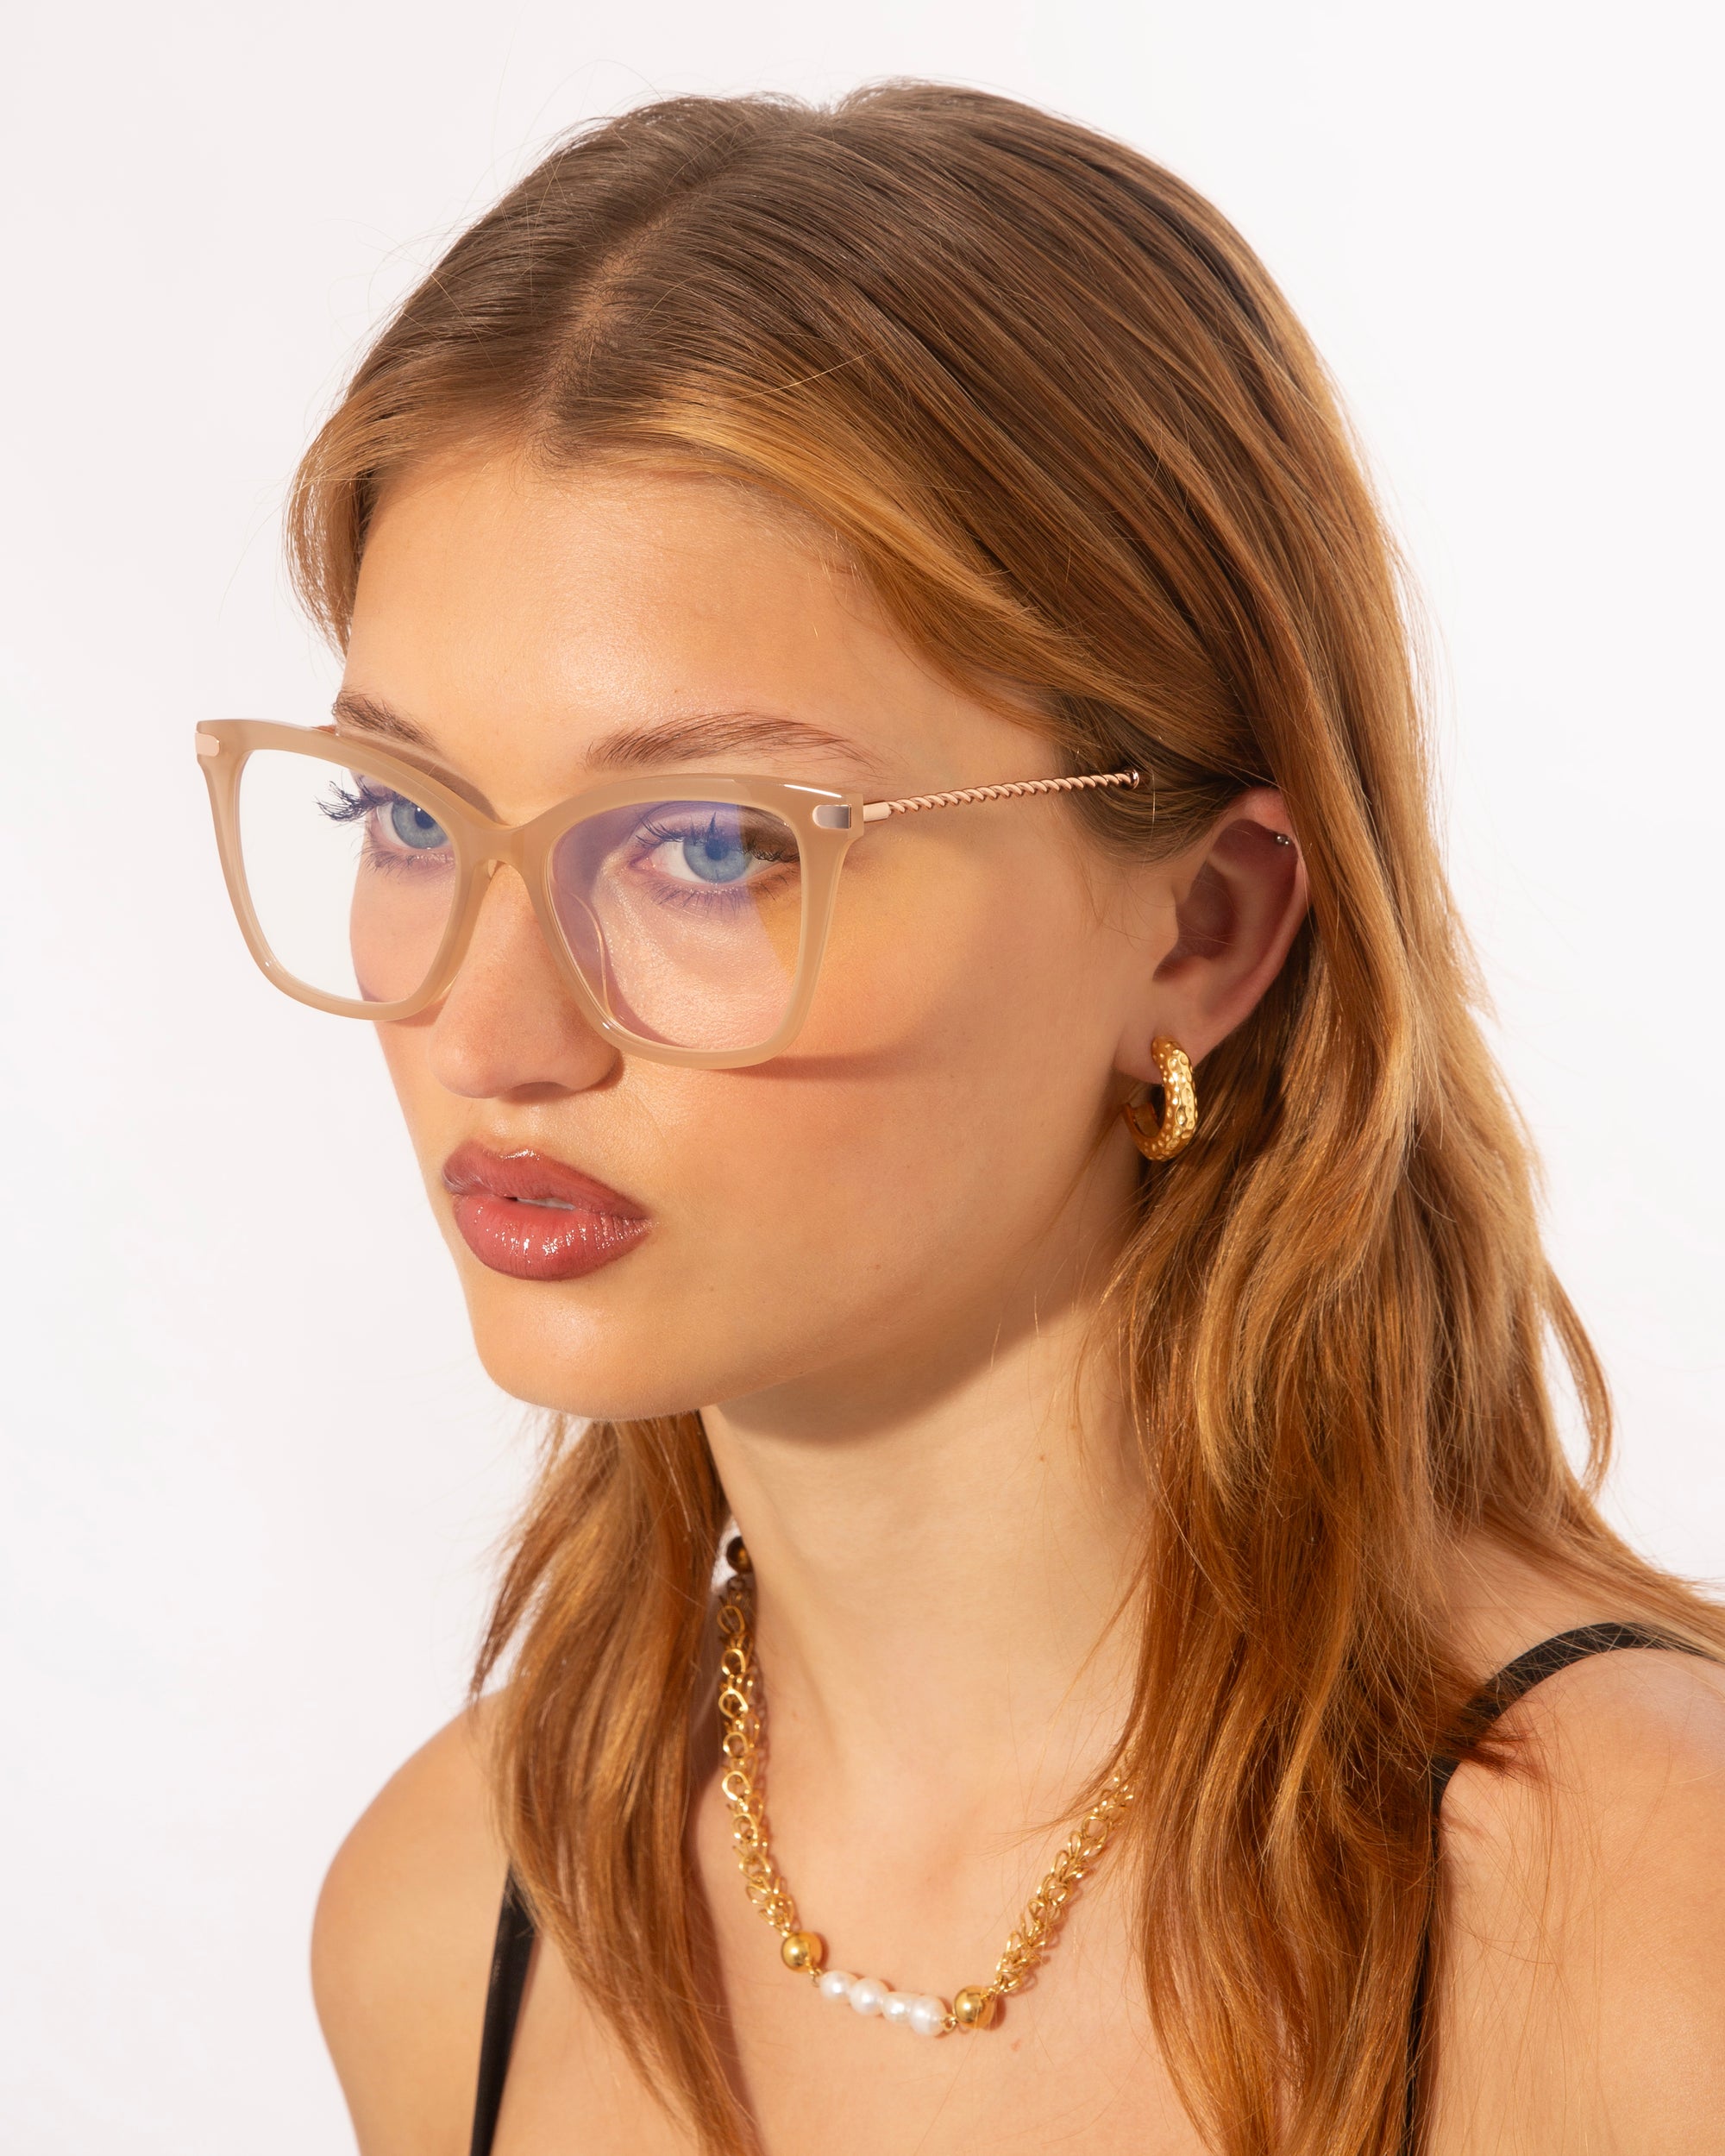 A young woman with long, light brown hair wears Cadenza rectangular optical glasses by For Art&#39;s Sake®, a gold chain necklace with pearl accents, and gold hoop earrings. She has a serious facial expression and is posed against a plain white background.